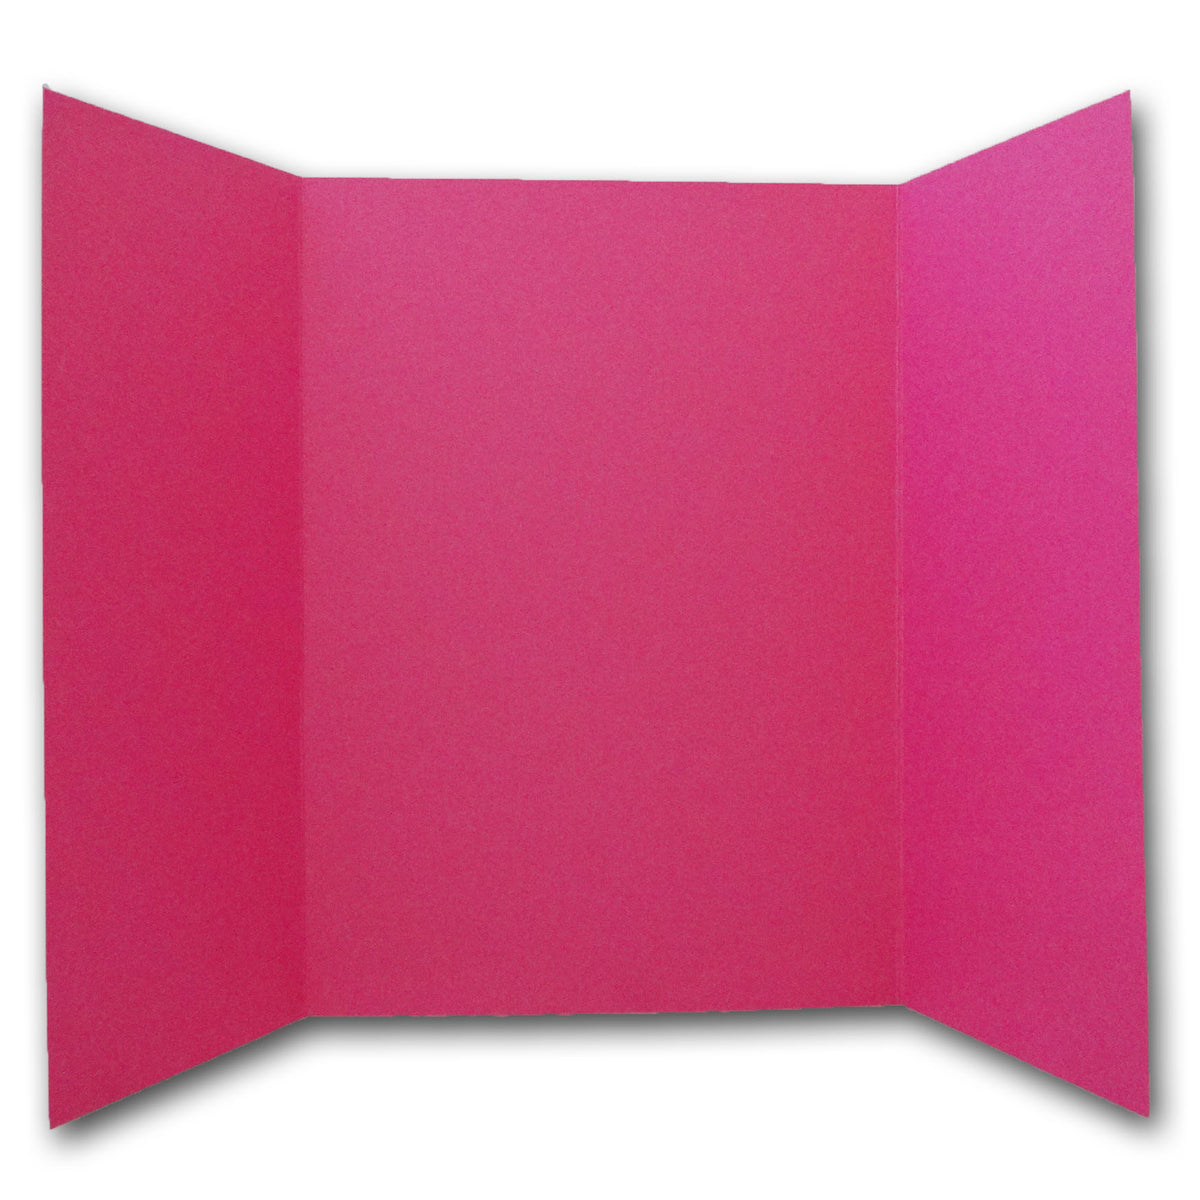 Hot Pink 5x7 Gate Fold Discount Card Stock for DIY Invitations